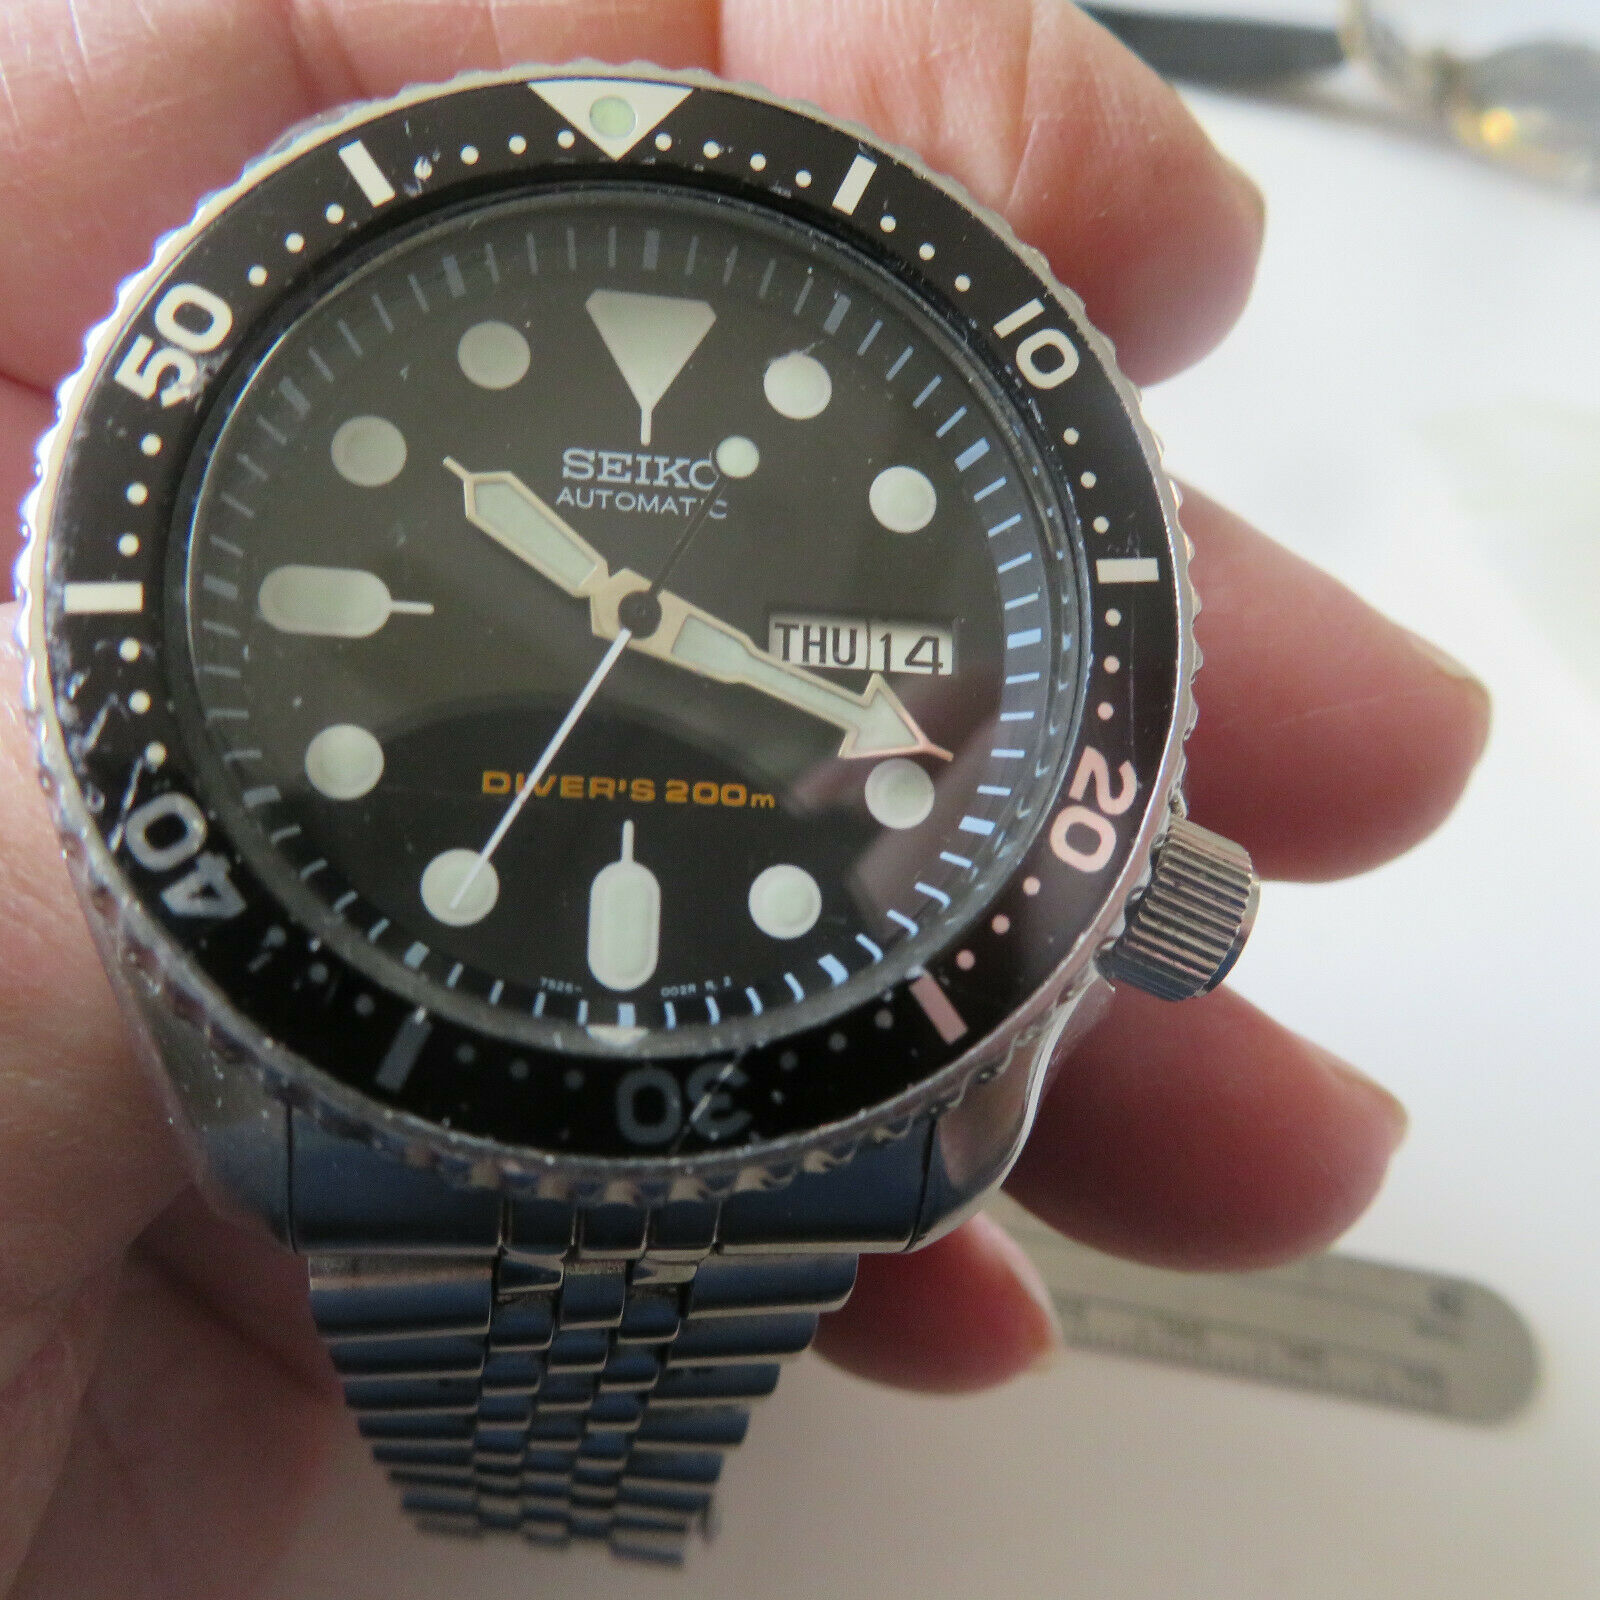 WATCH SEIKO SCUBA DIVER'S 200mm AUTOMATIC DAY & DATE STAINLESS STEEL  RUNNING | WatchCharts